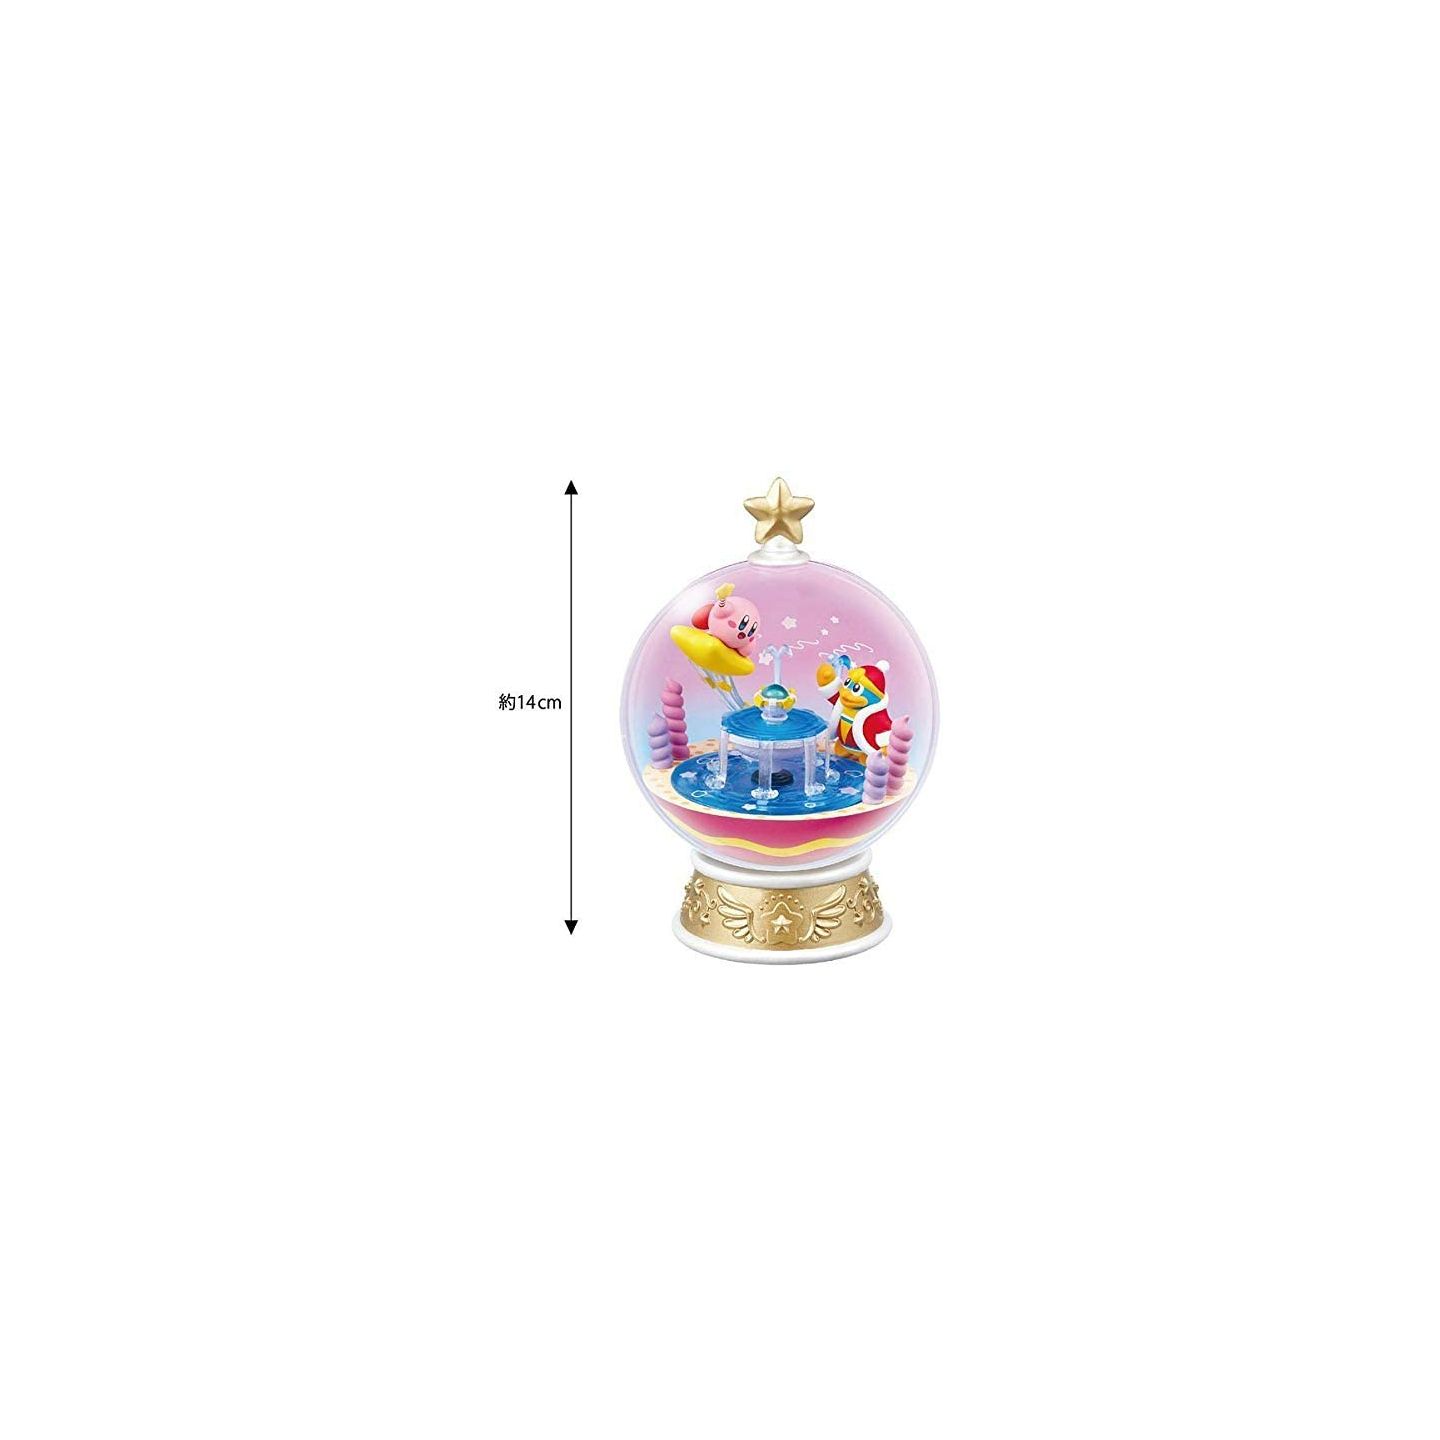 Kirby Super Star Terrarium Collection Super DX Kirby & Friends Japan import NEW 